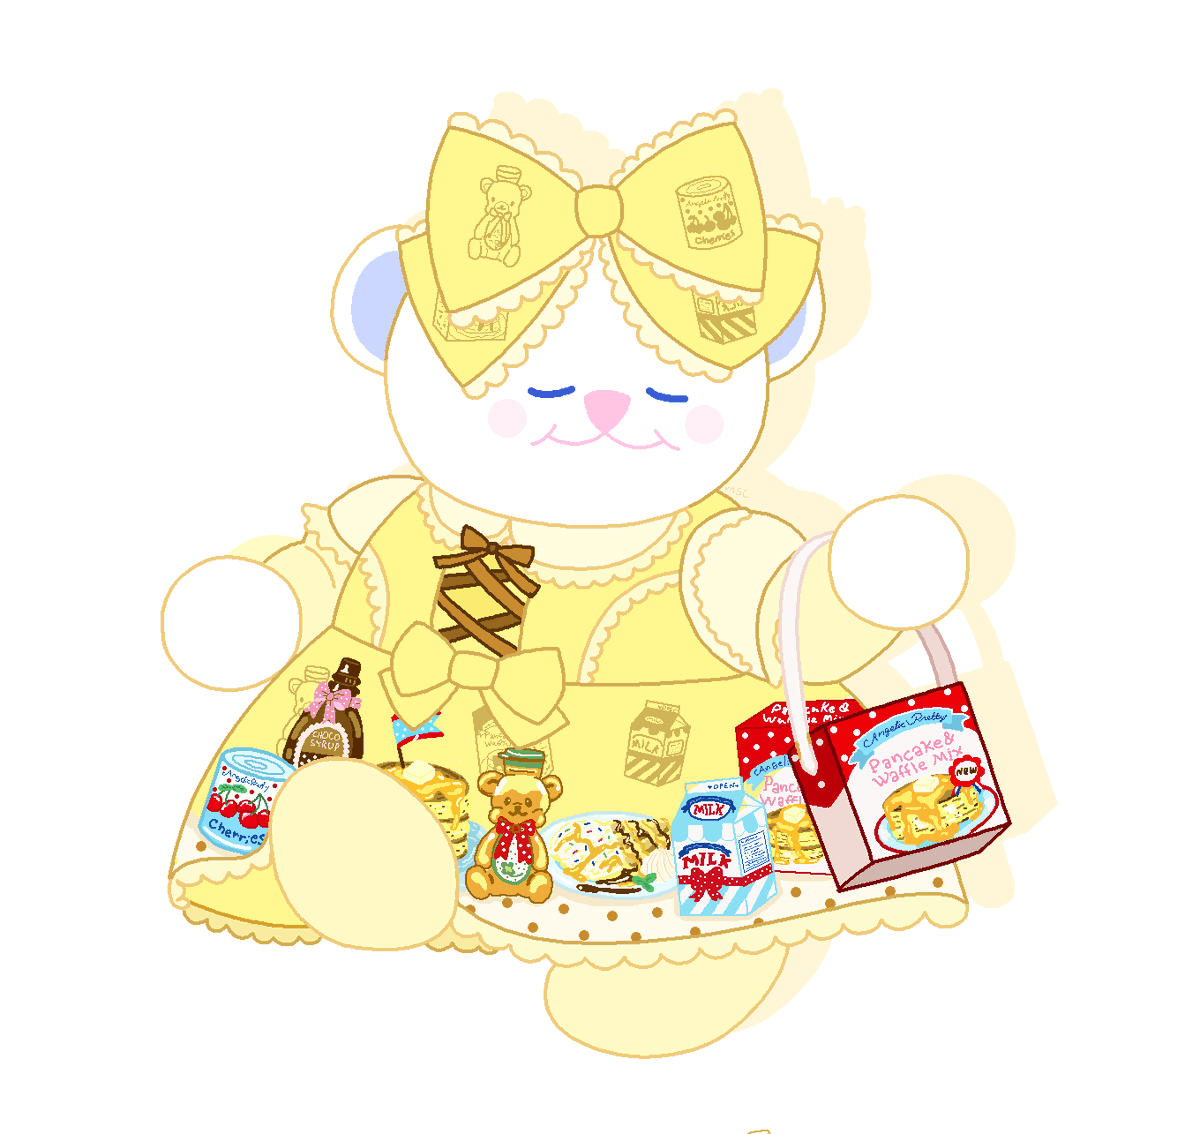 「💛🥞💛 」|the silly ・ ᴥ ・のイラスト